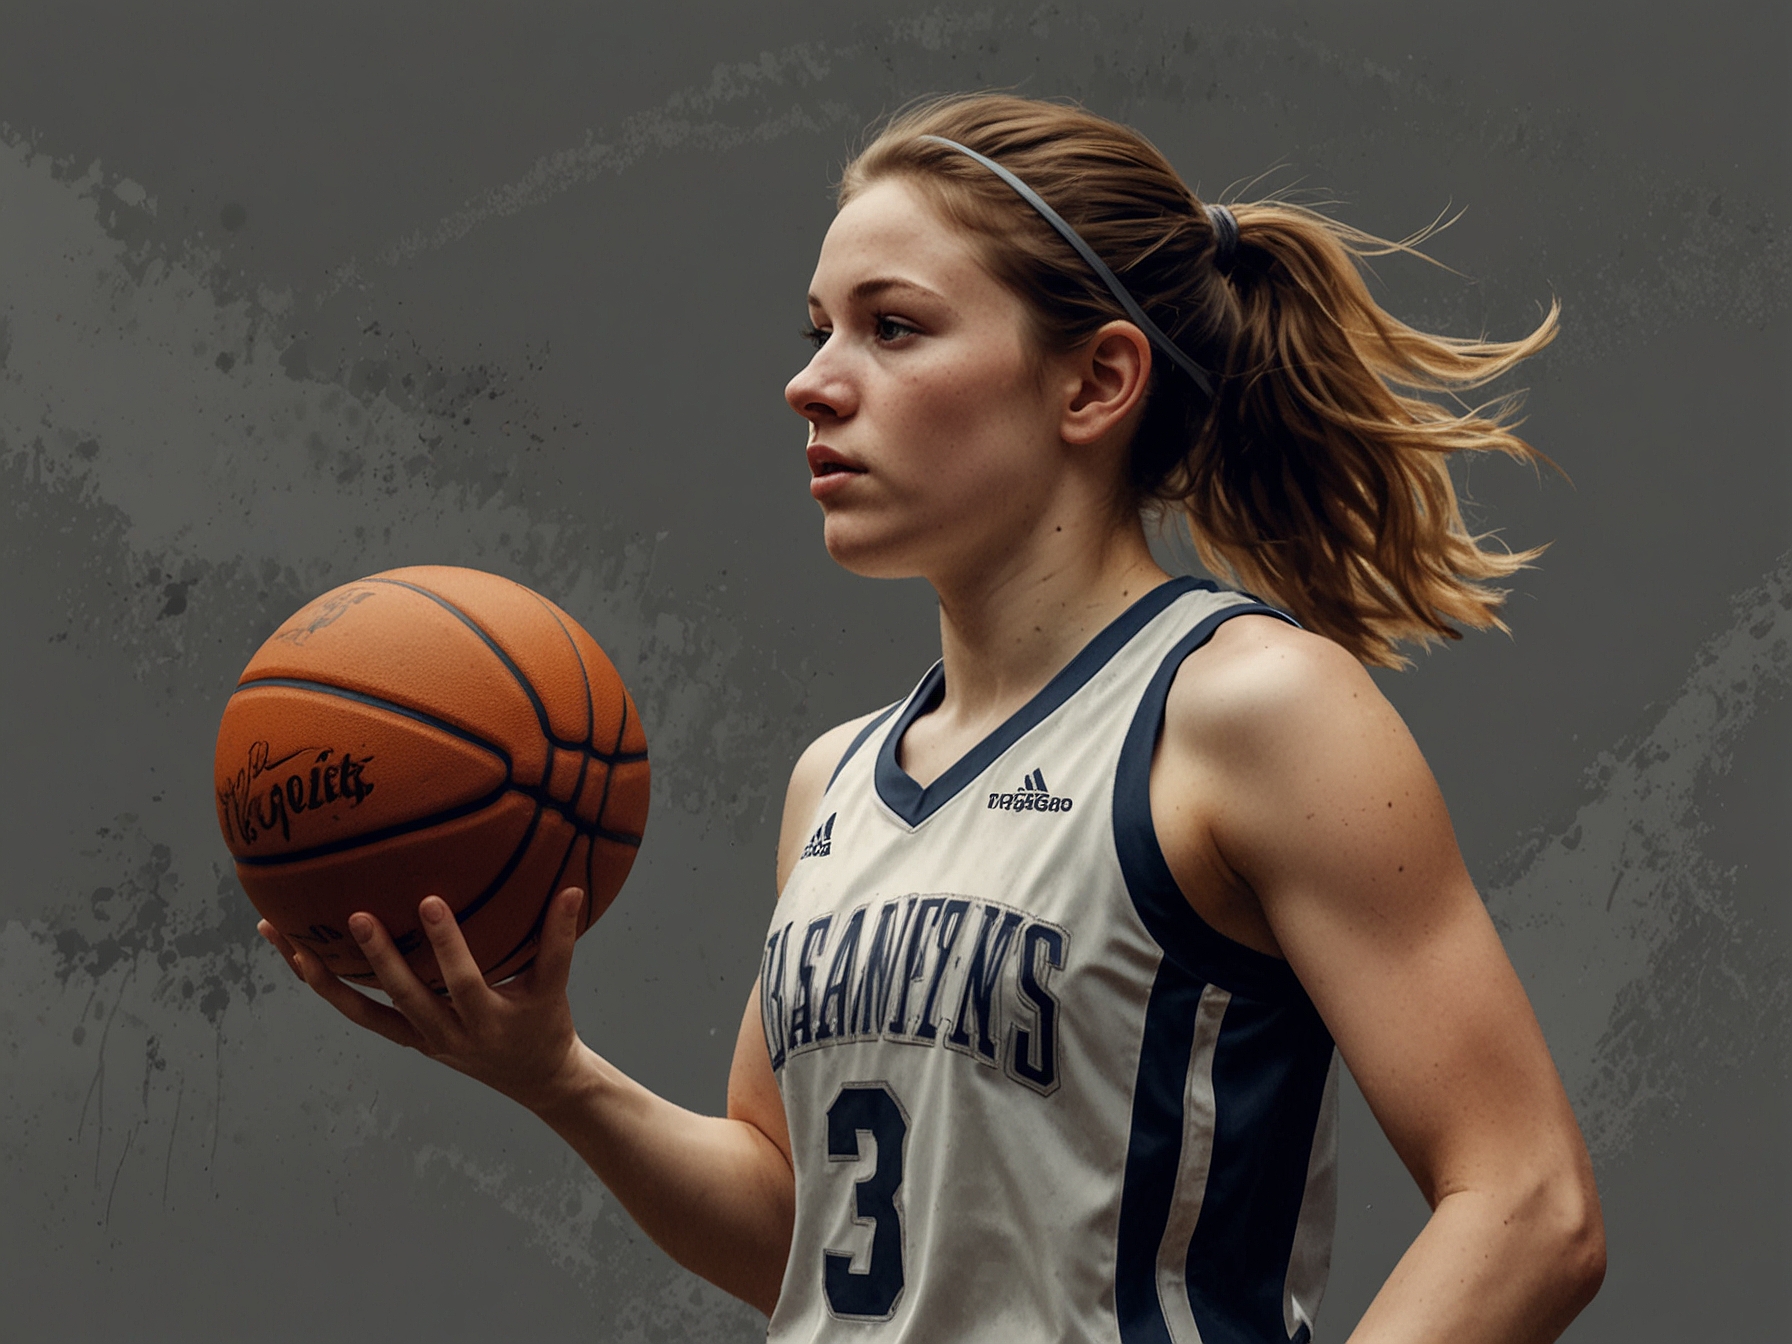 A dynamic illustration showcasing Caitlin Clark's journey, displaying her progression from high school through to professional league, emphasizing her dedication and unmatched shooting skills.